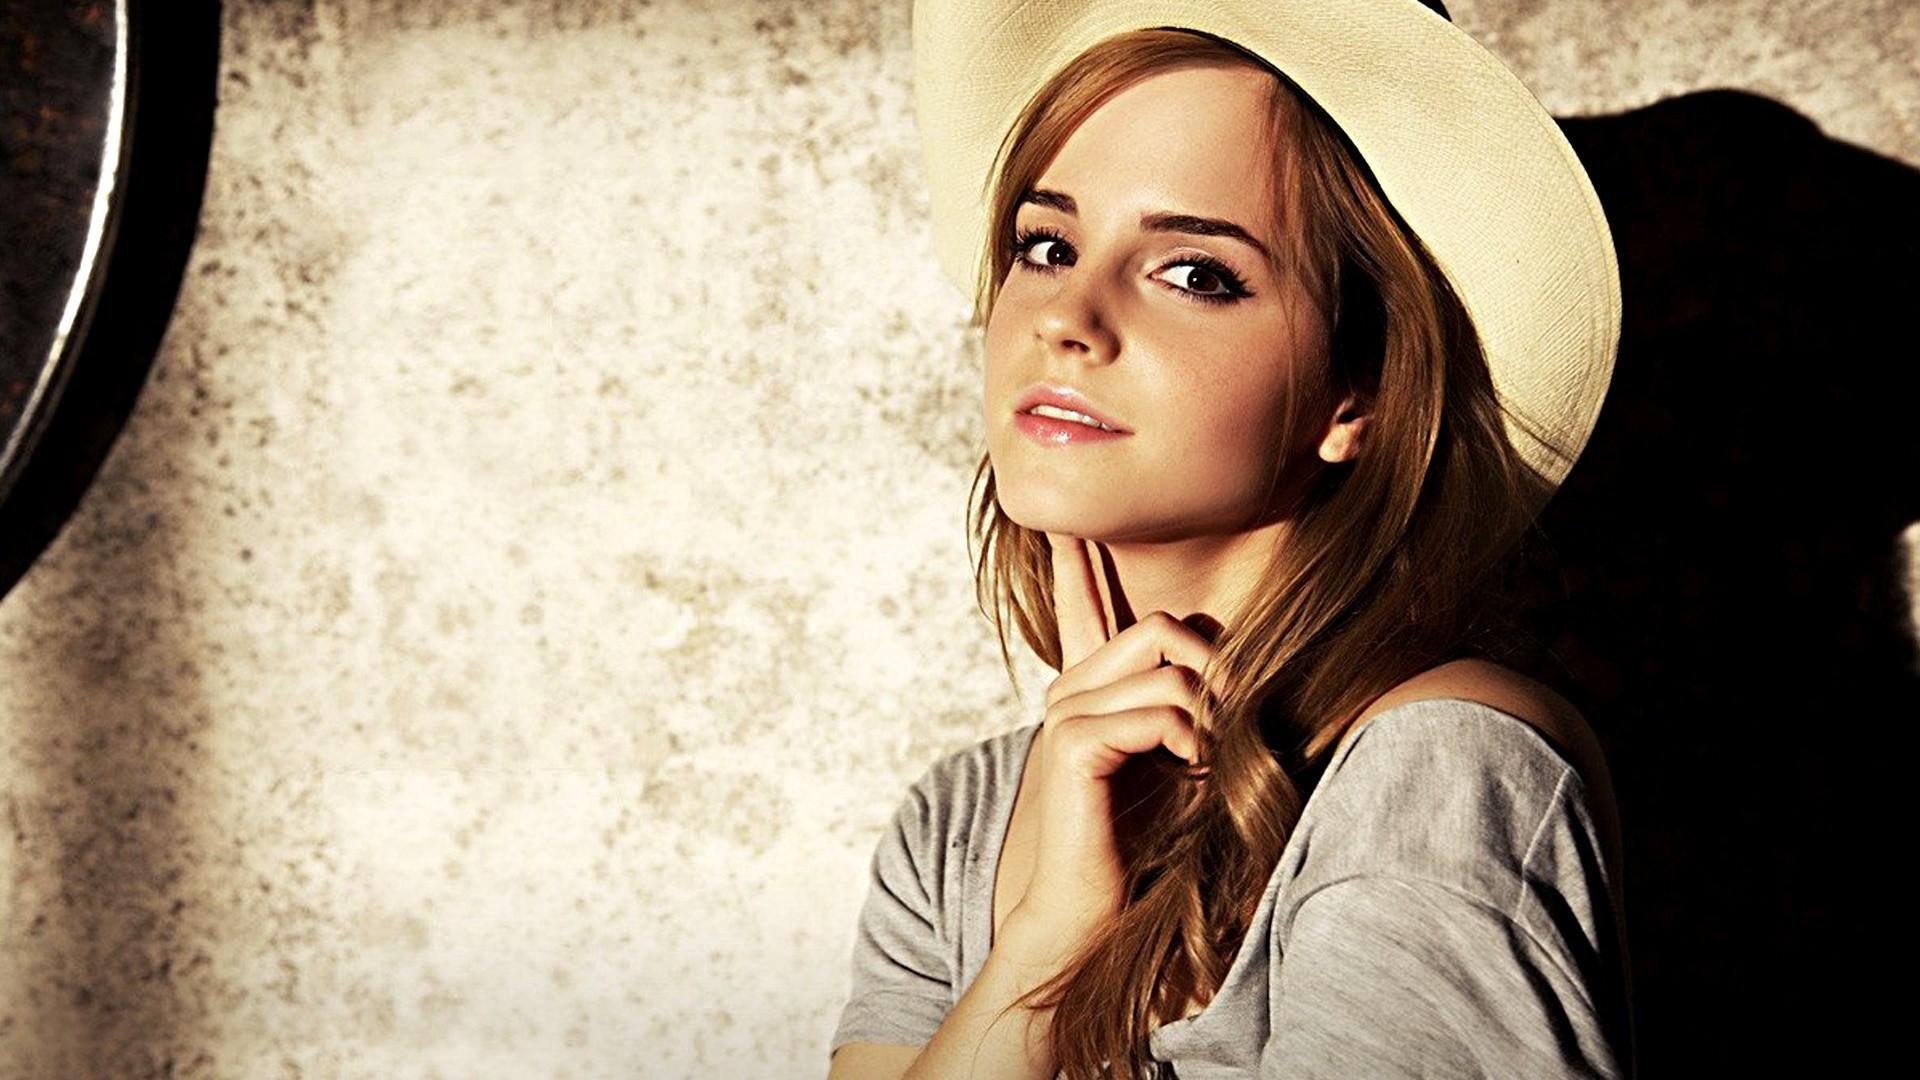 1920x1080 Emma Watson HD Images - Free download latest Emma Watson HD Images for  Computer, Mobile, iPhone, iPad or any Gadget at WallpapersCharlie.com.